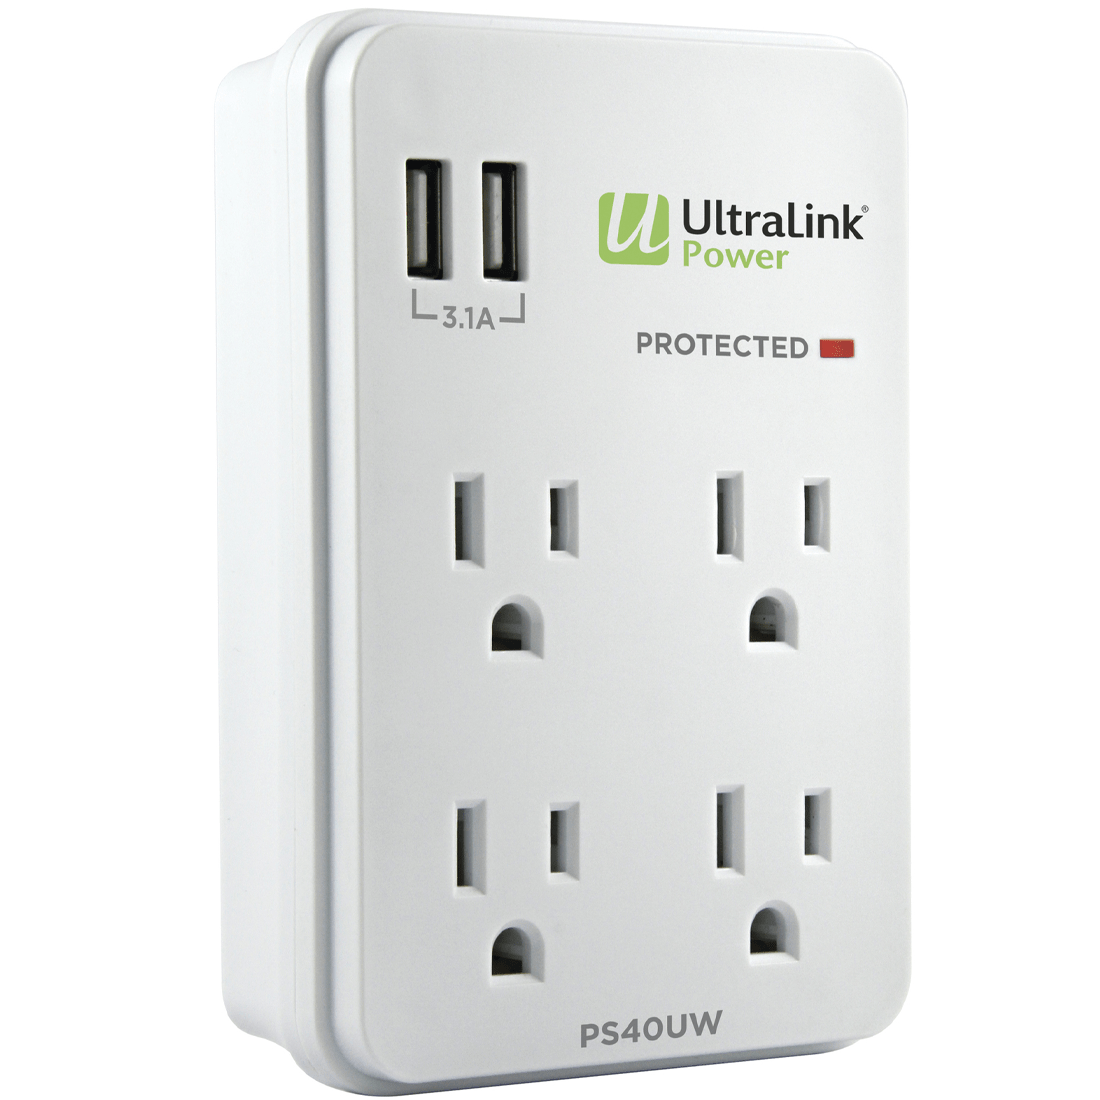 UltraLink Power: 4 Outlet 2 USB 3.1A Wall Multimedia Surge Protector